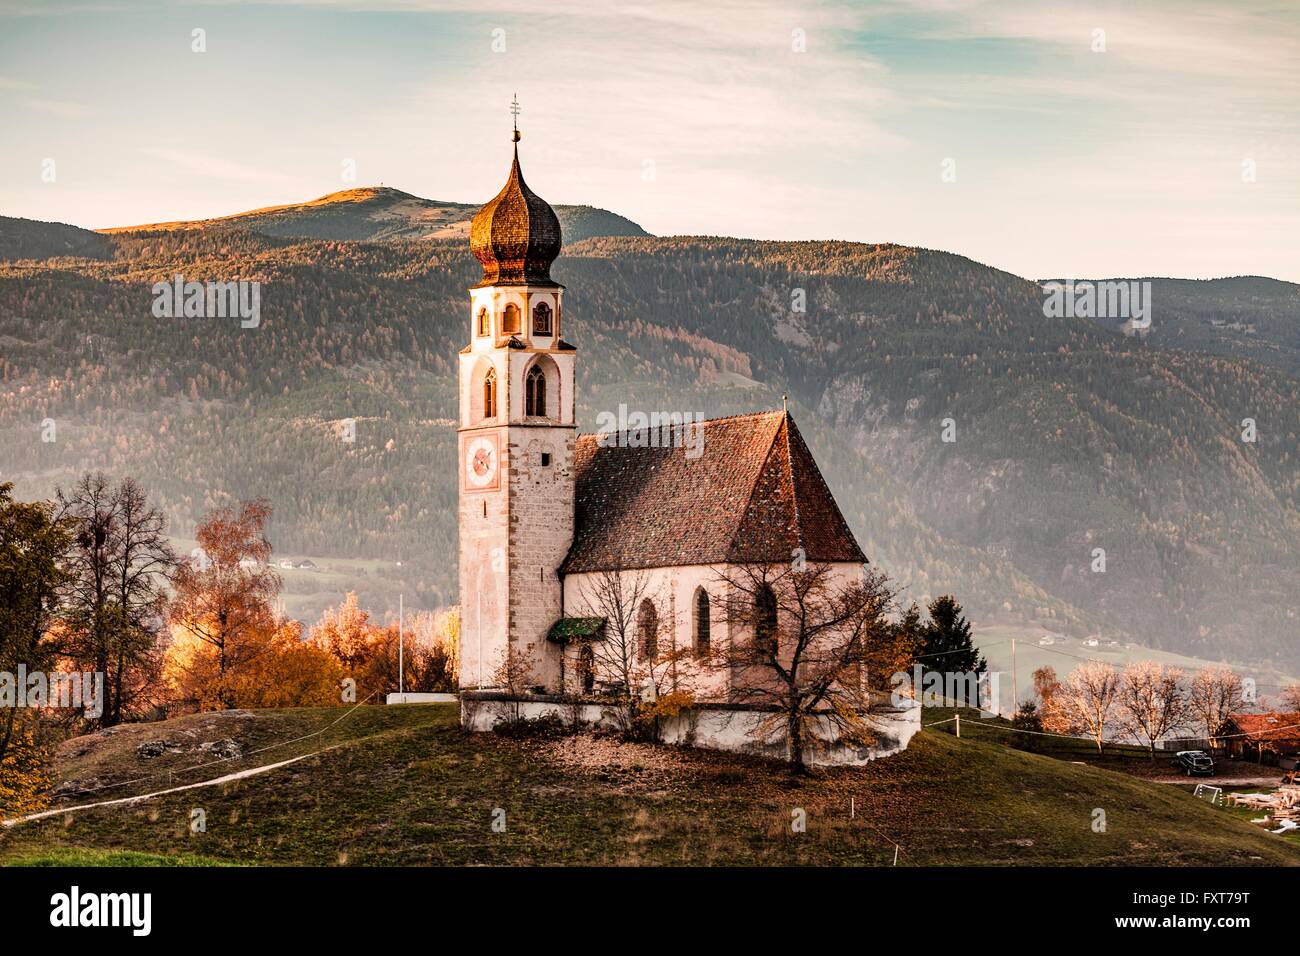 Traditional church on hill, Dolomites, Italy Stock Photo